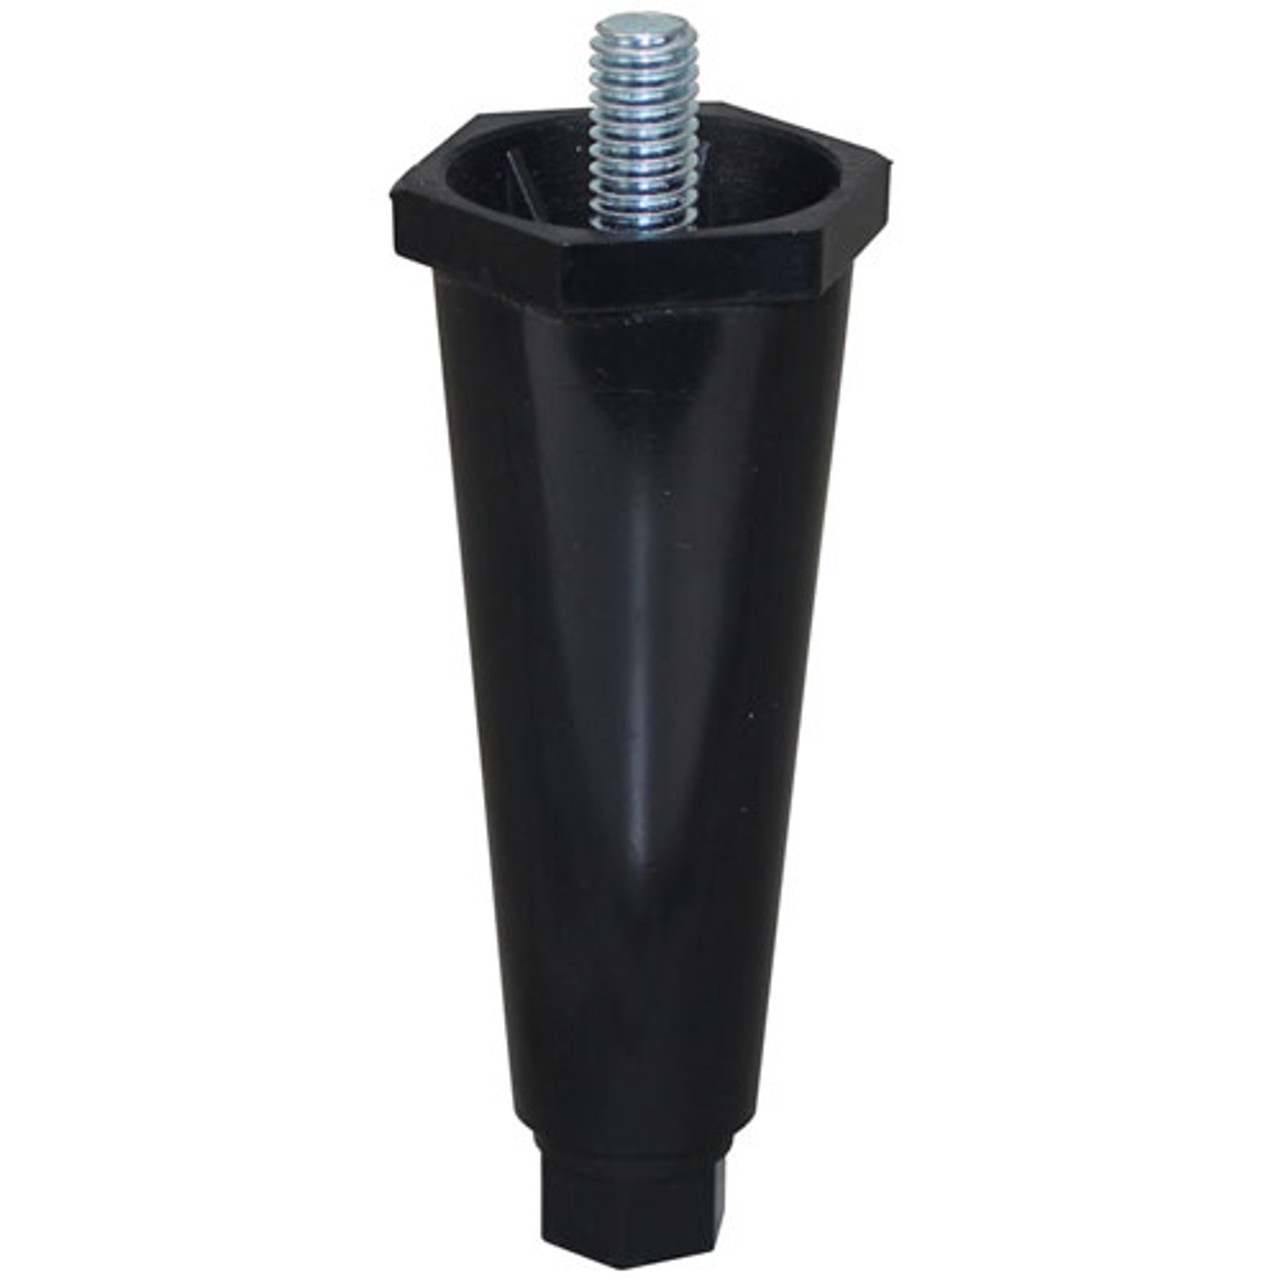 Leg 4H 3/8-16 - Replacement Part For Hatco 5.30.007